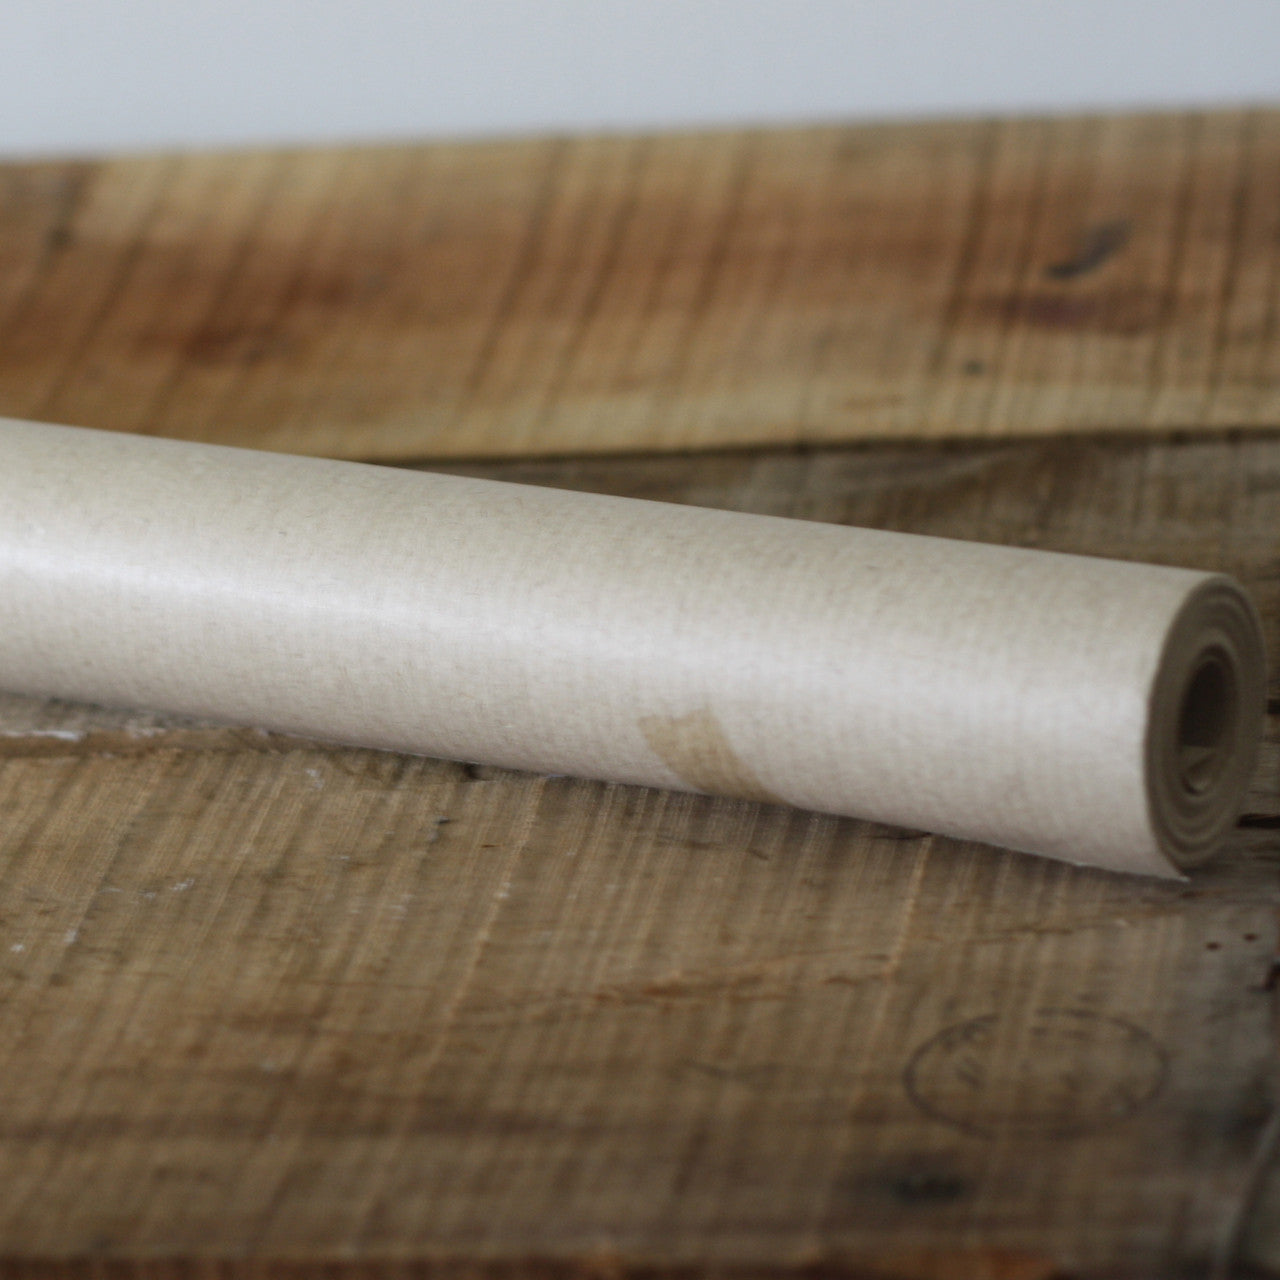 Brown Wrapping Paper Roll - 8m Roll – The Wedding of My Dreams